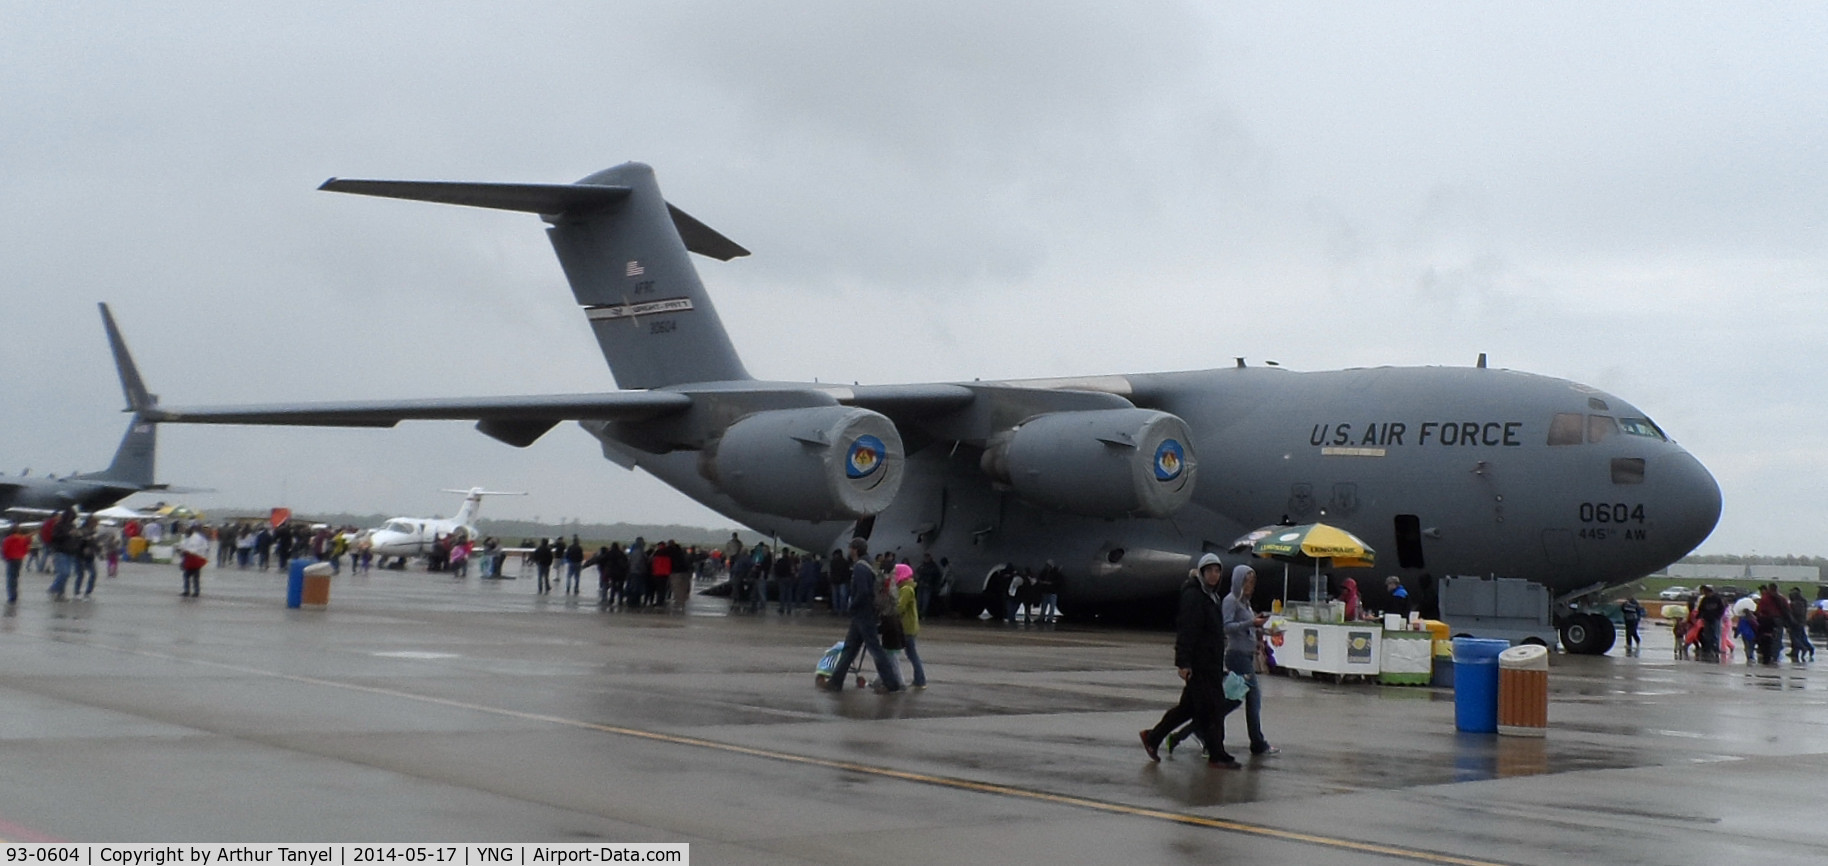 93-0604, 1994 McDonnell Douglas C-17A Globemaster III C/N F-23/P-20, On display @ Youngstown Airshow